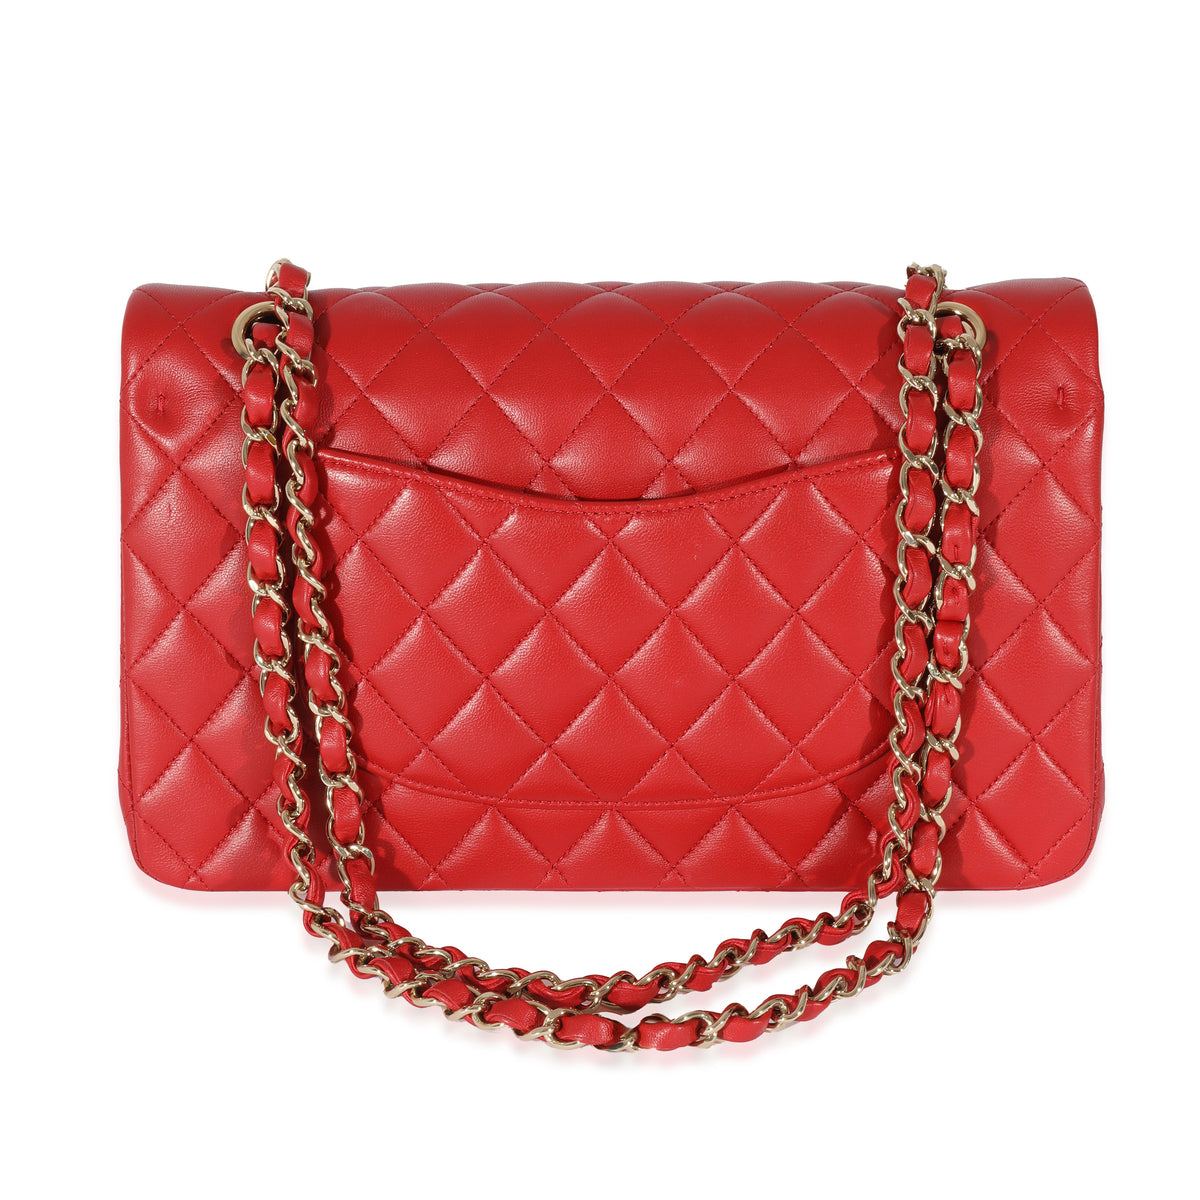 Chanel Red Quilted Lambskin Medium Classic Flap Bag, myGemma